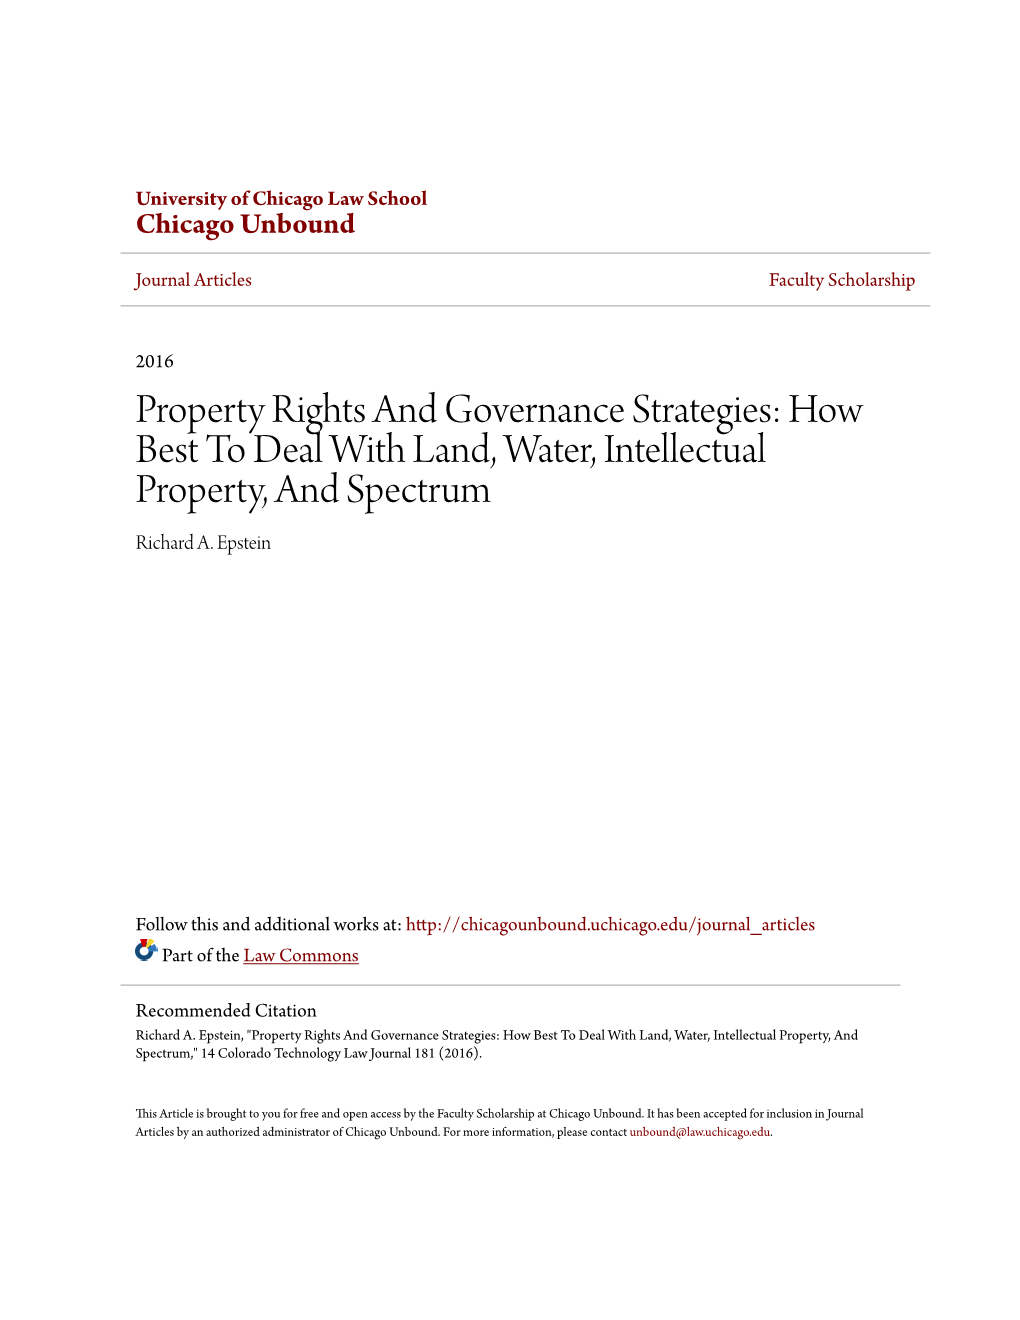 How Best to Deal with Land, Water, Intellectual Property, and Spectrum Richard A